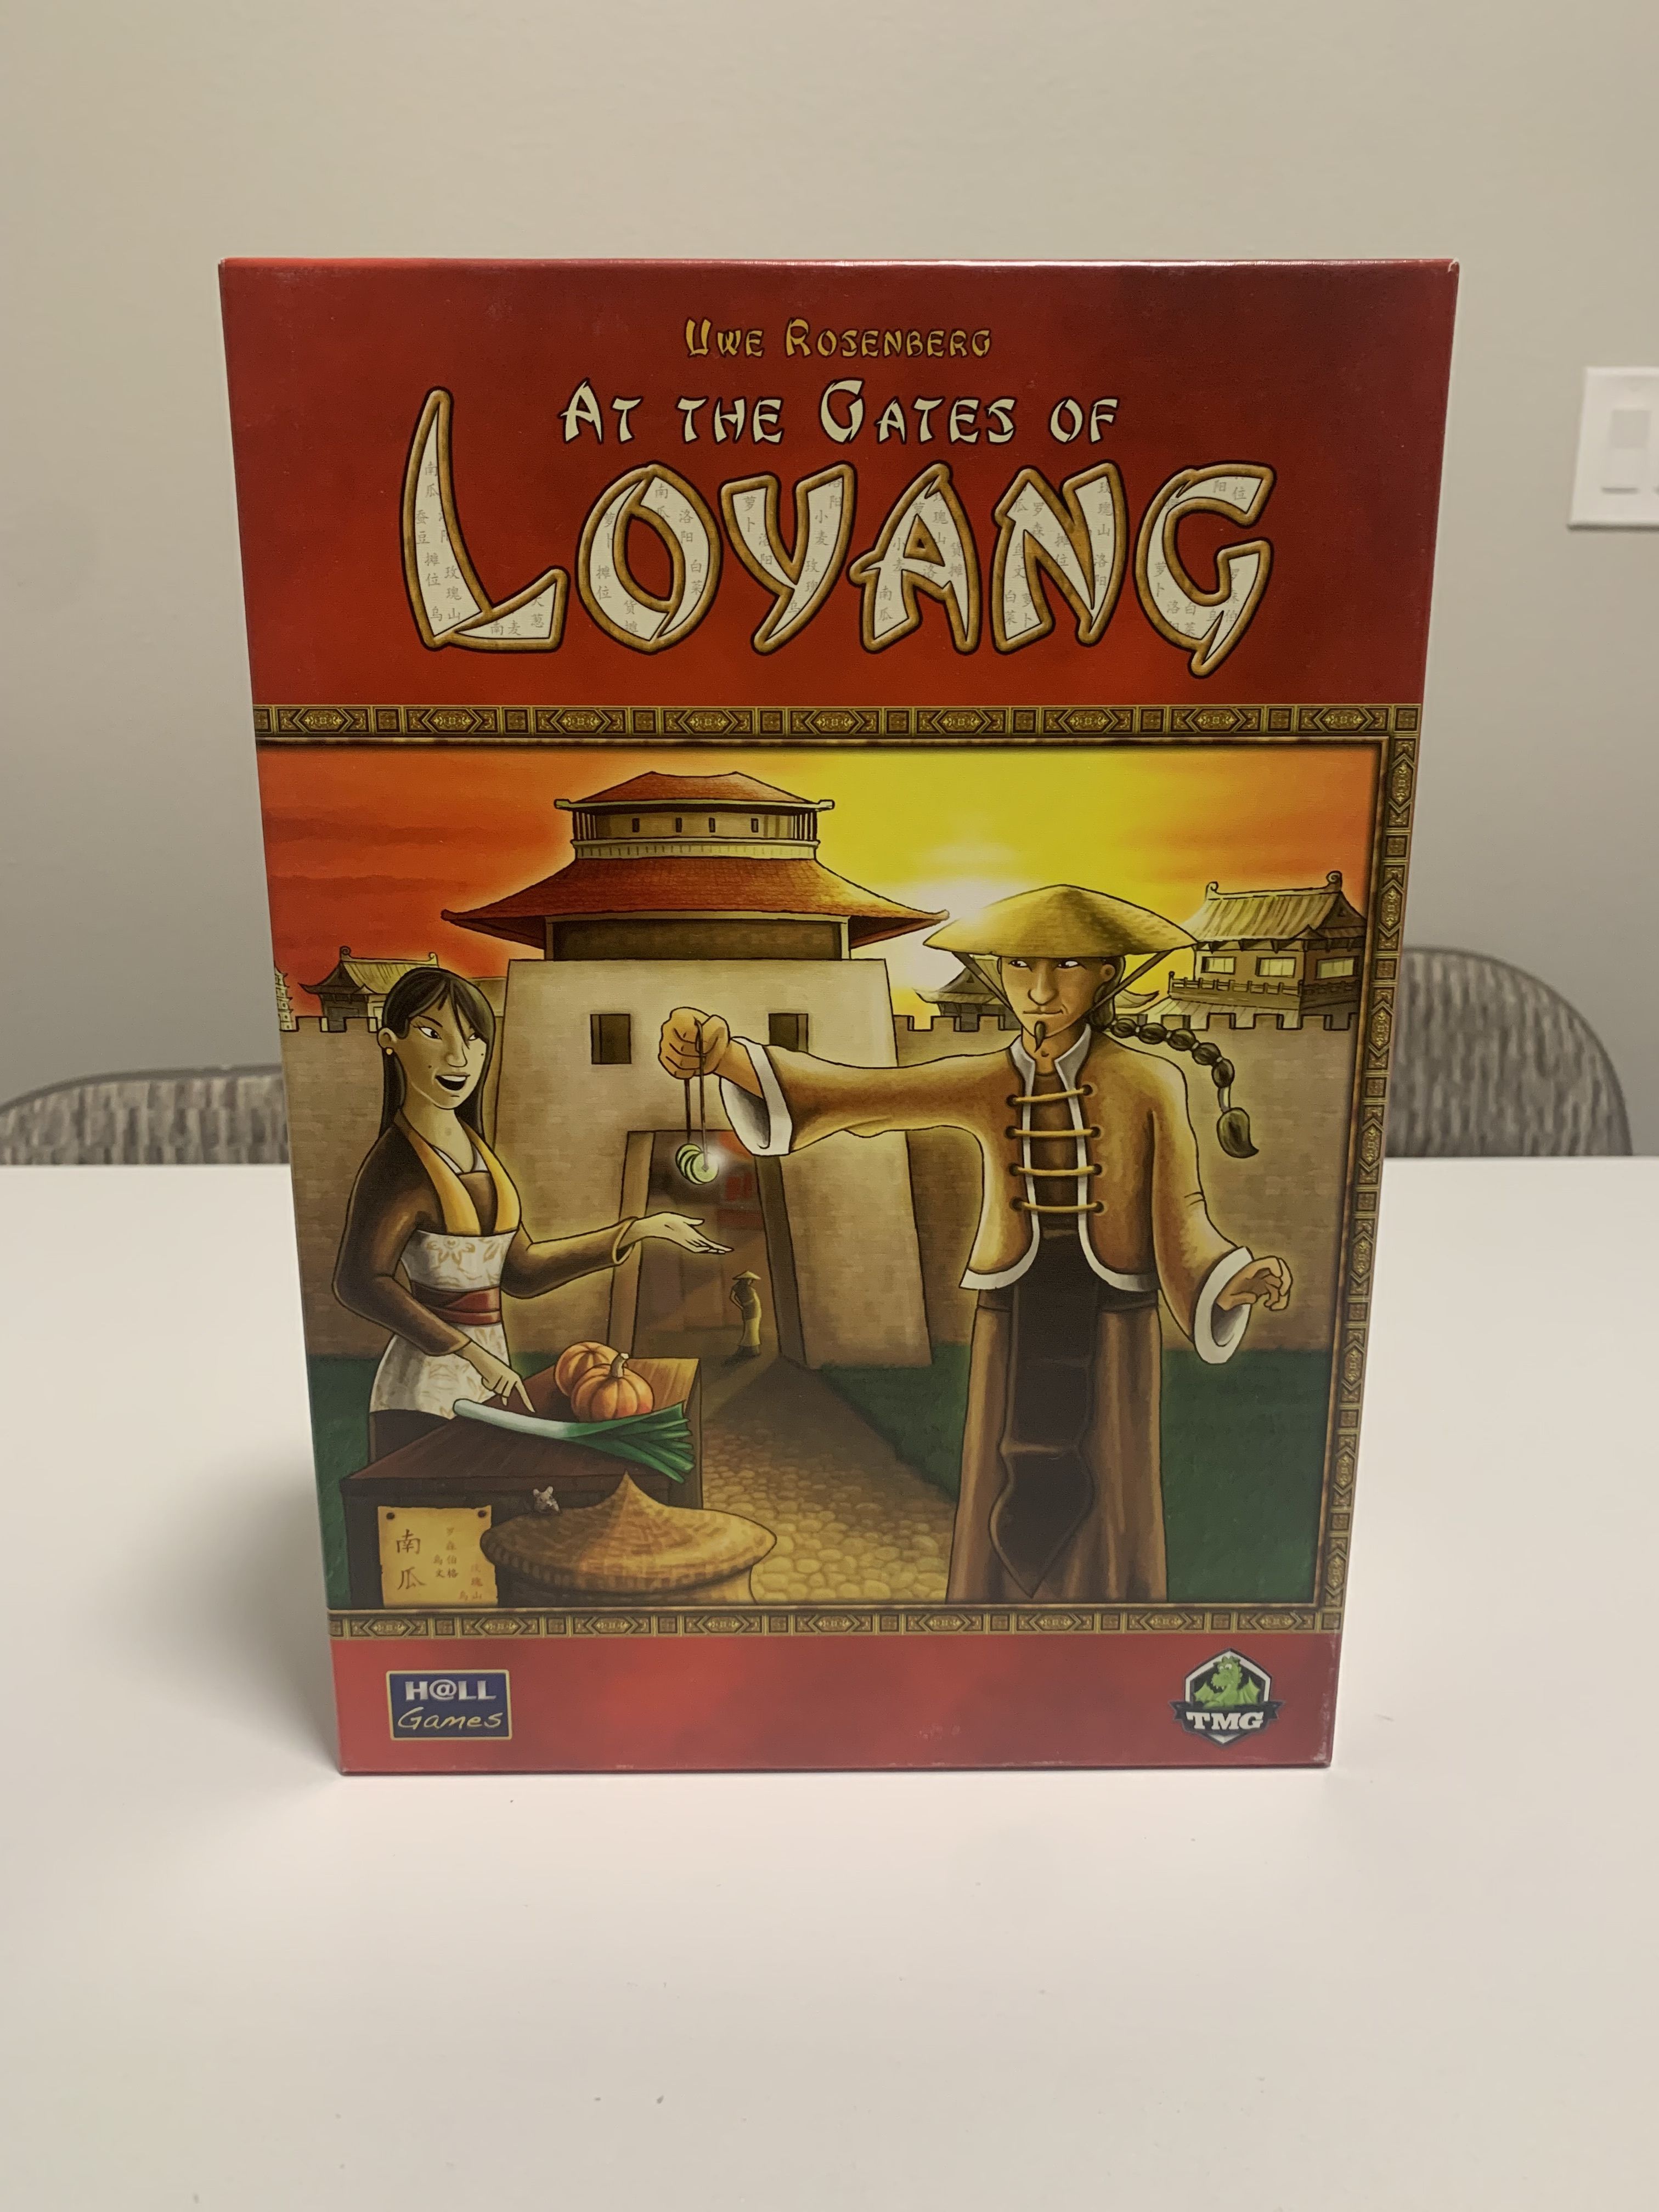 Product Details | At the Gates of Loyang | GeekMarket